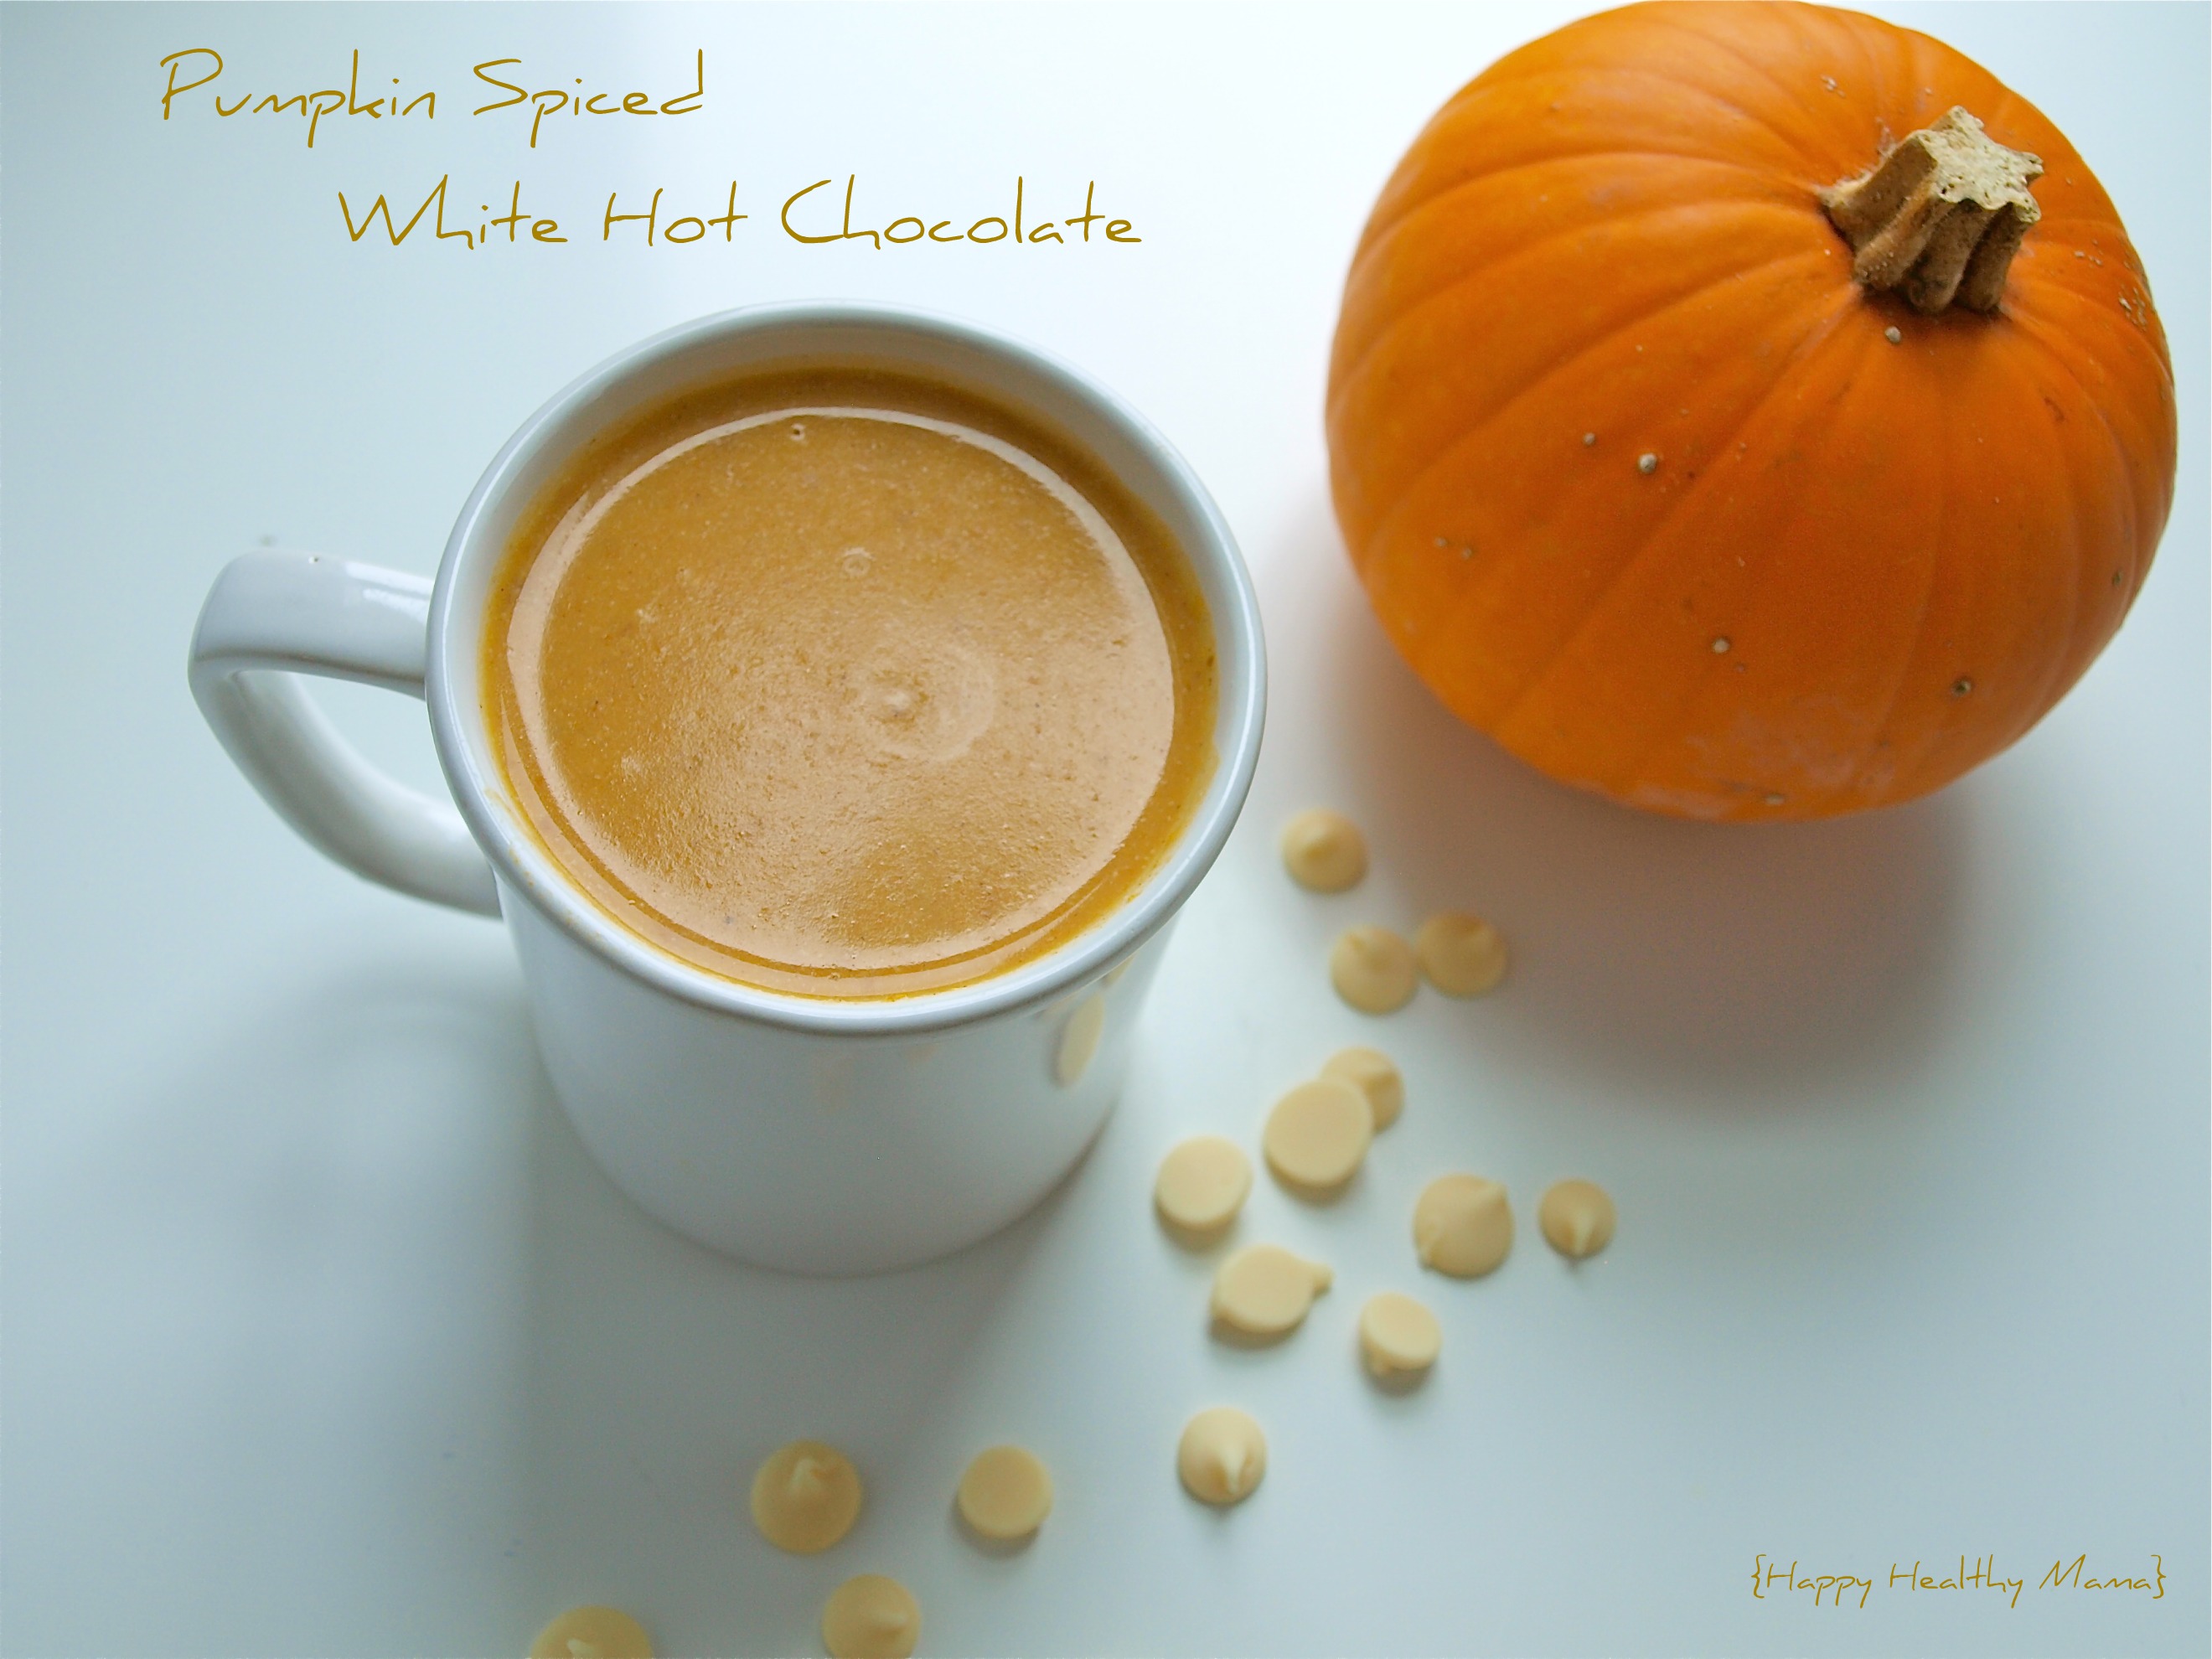 Enjoy the crisp flavors of fall with every sip! Source:http://www.babble.com/best-recipes